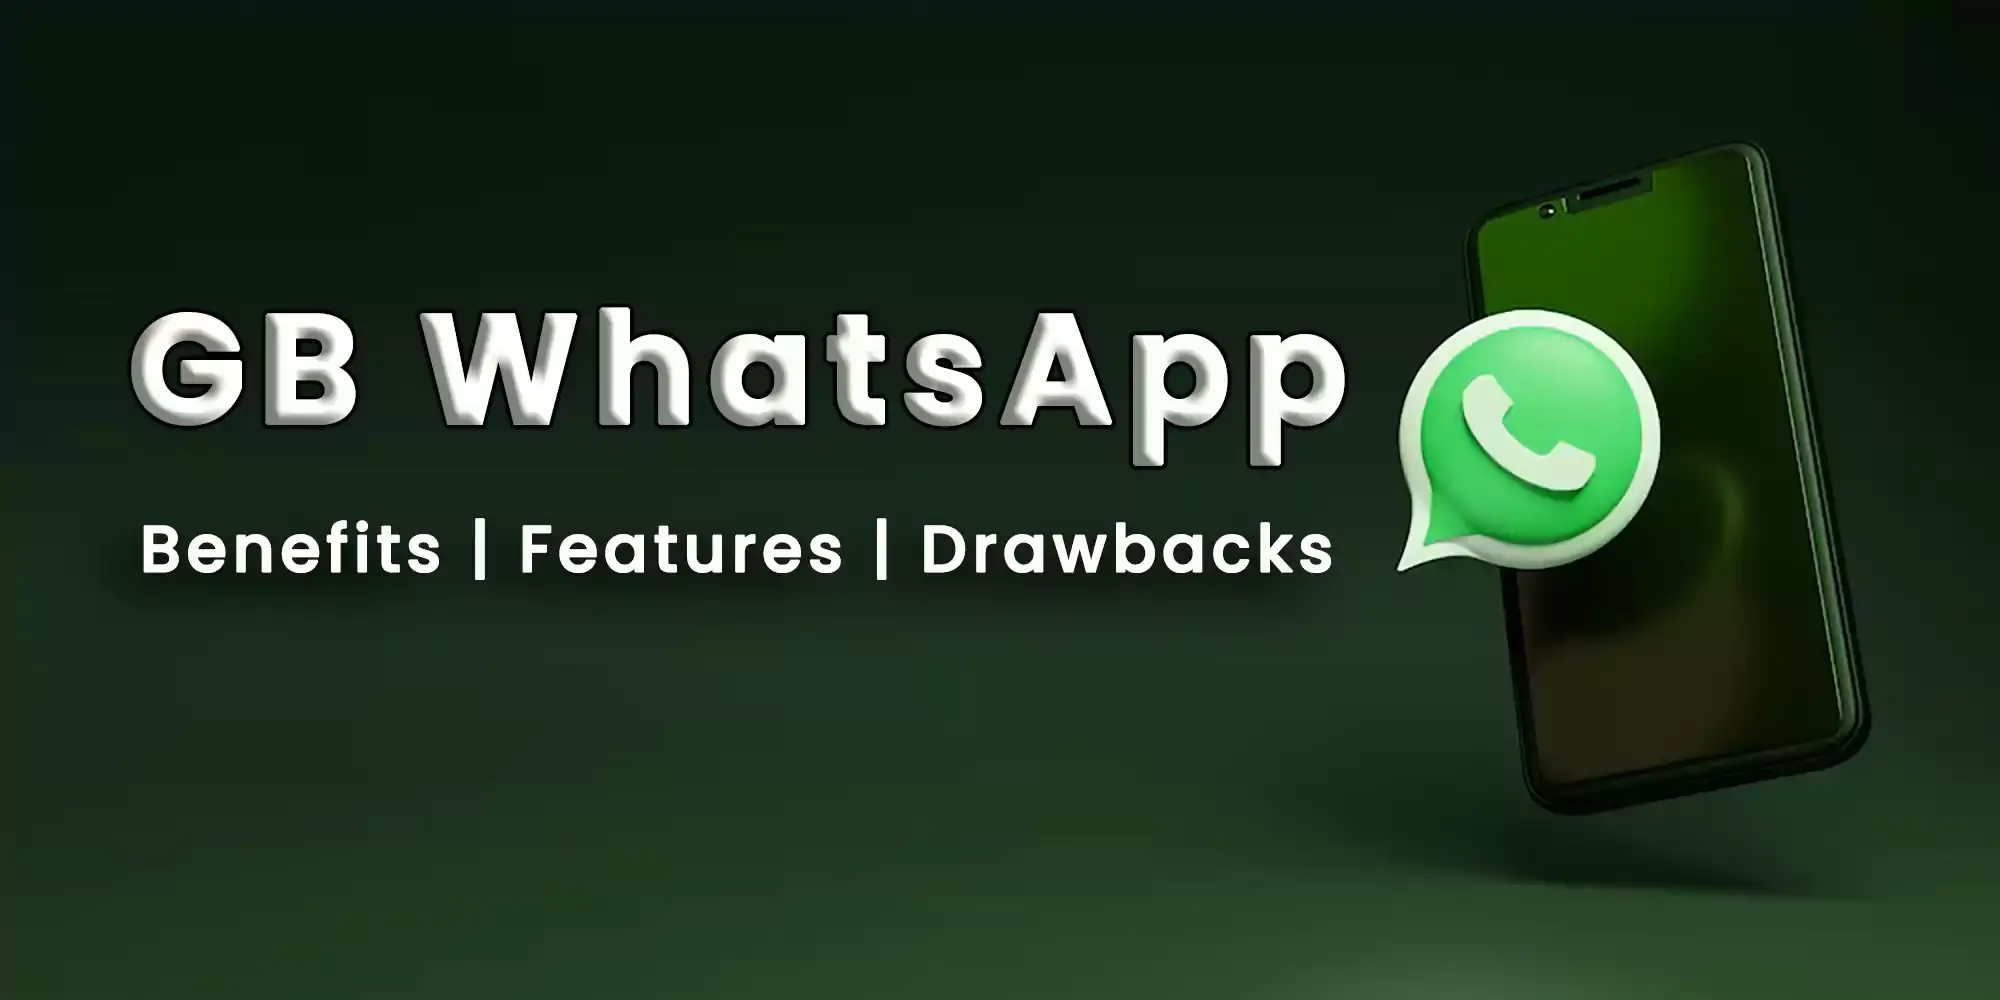 GB WhatsApp Benefits, Features, and Drawbacks